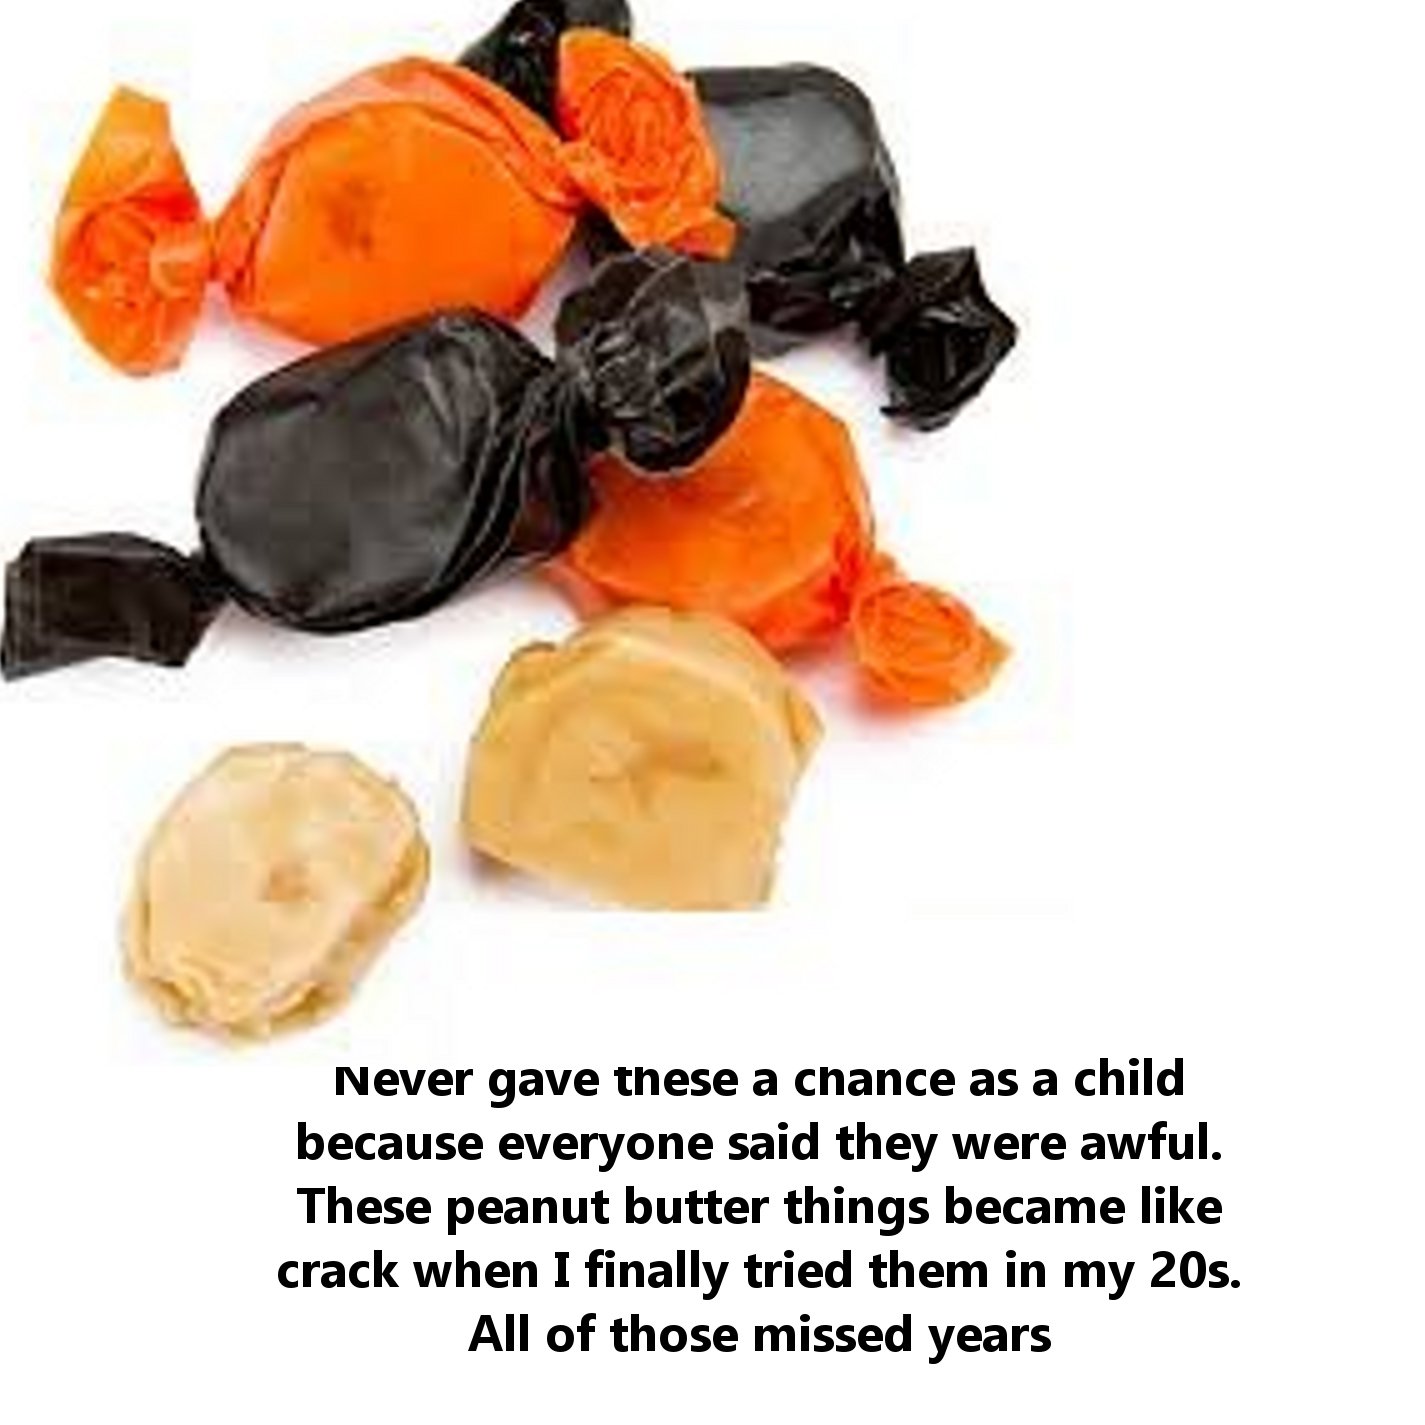 peanut butter kisses - Never gave these a chance as a child because everyone said they were awful. These peanut butter things became crack when I finally tried them in my 20s. All of those missed years